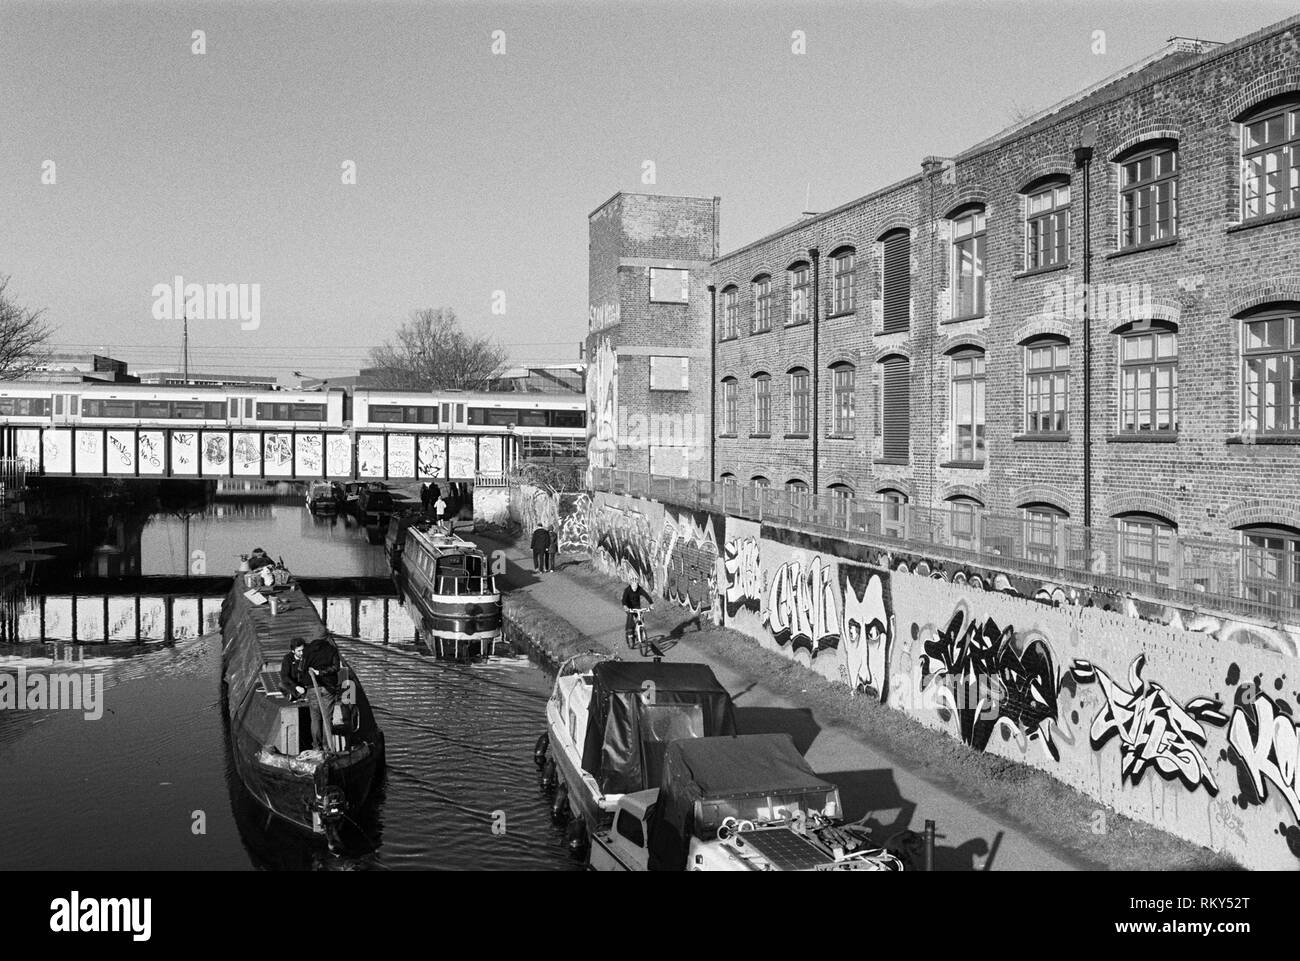 Narrowboat and pedestrians along the River Lea Navigation at Hackney Wick, East London UK, with train crossing over the raiiway bridge in background Stock Photo